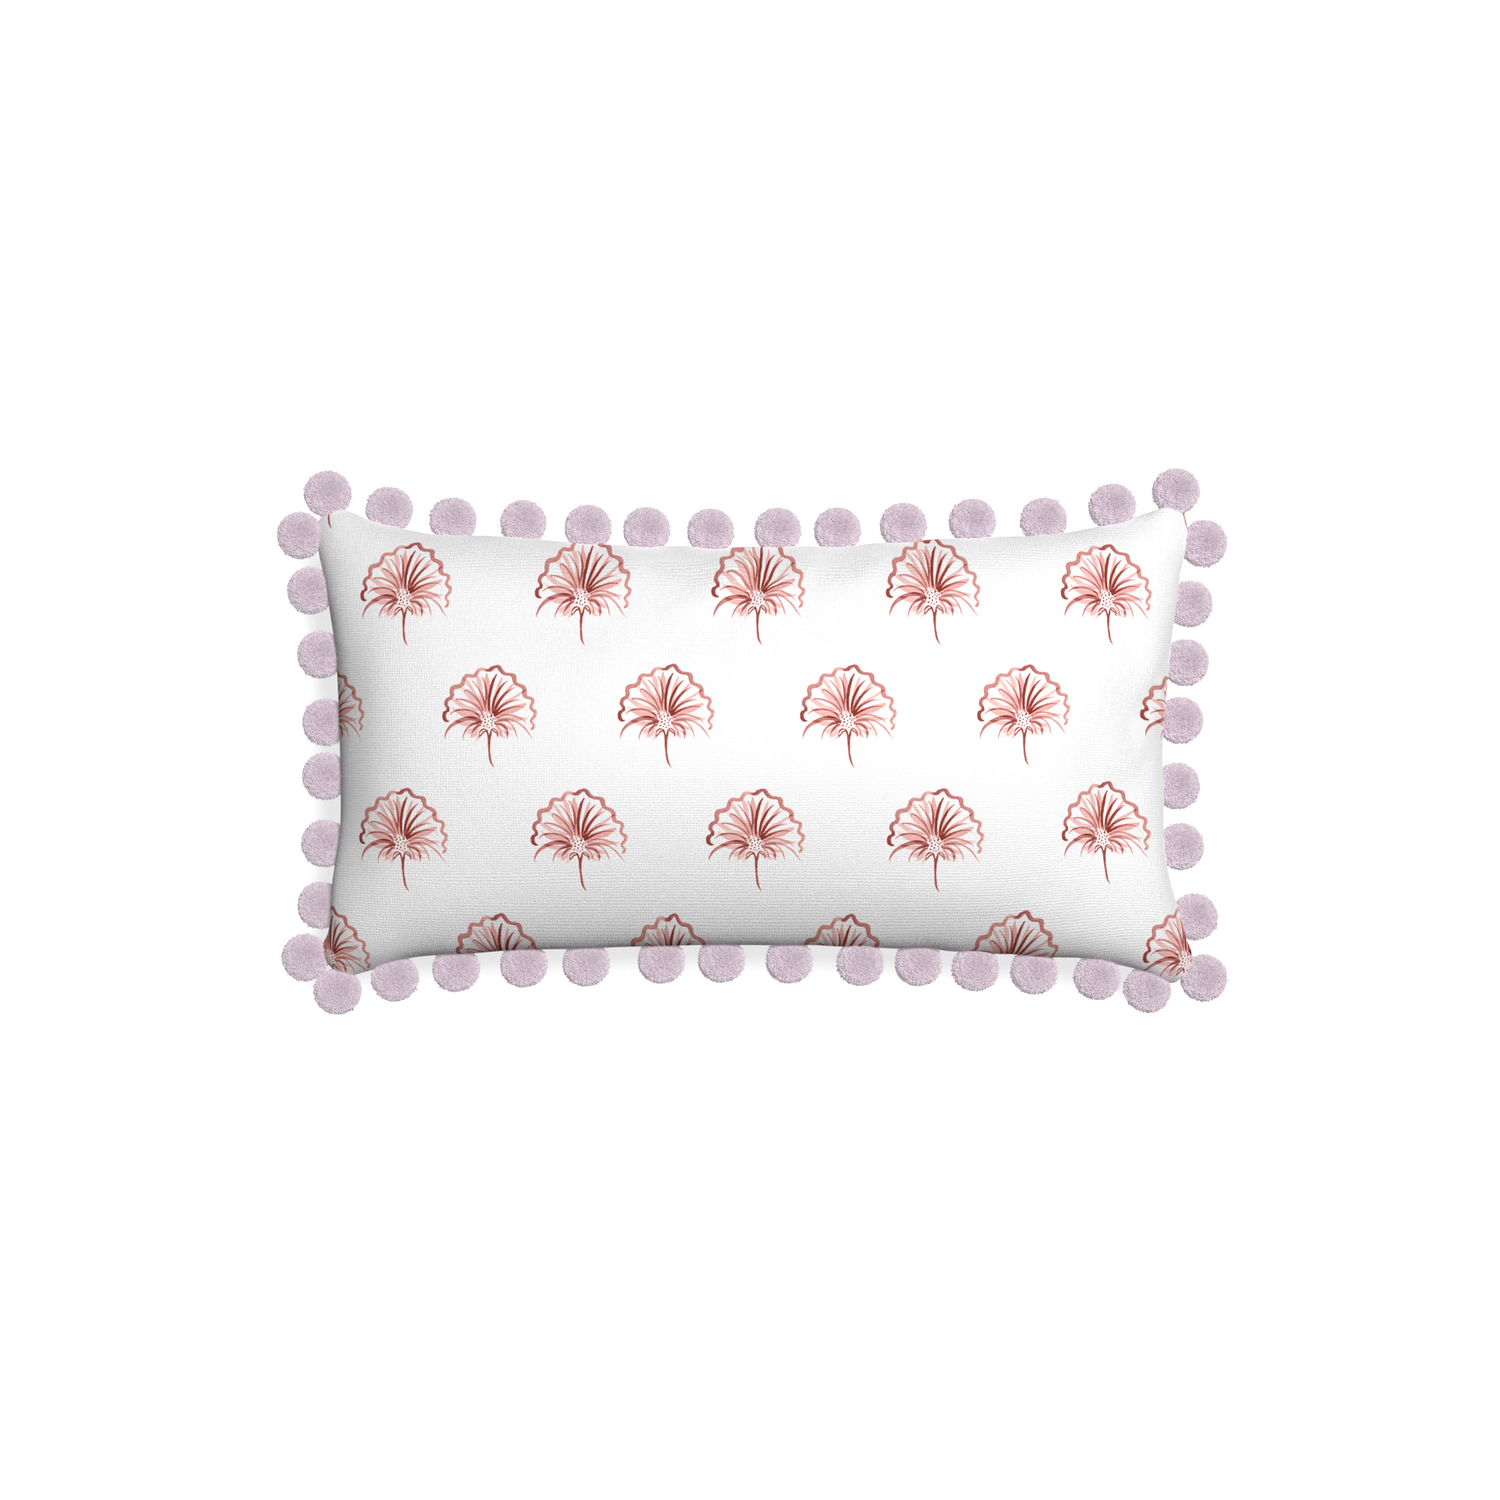 Petite-lumbar penelope rose custom floral pinkpillow with l on white background